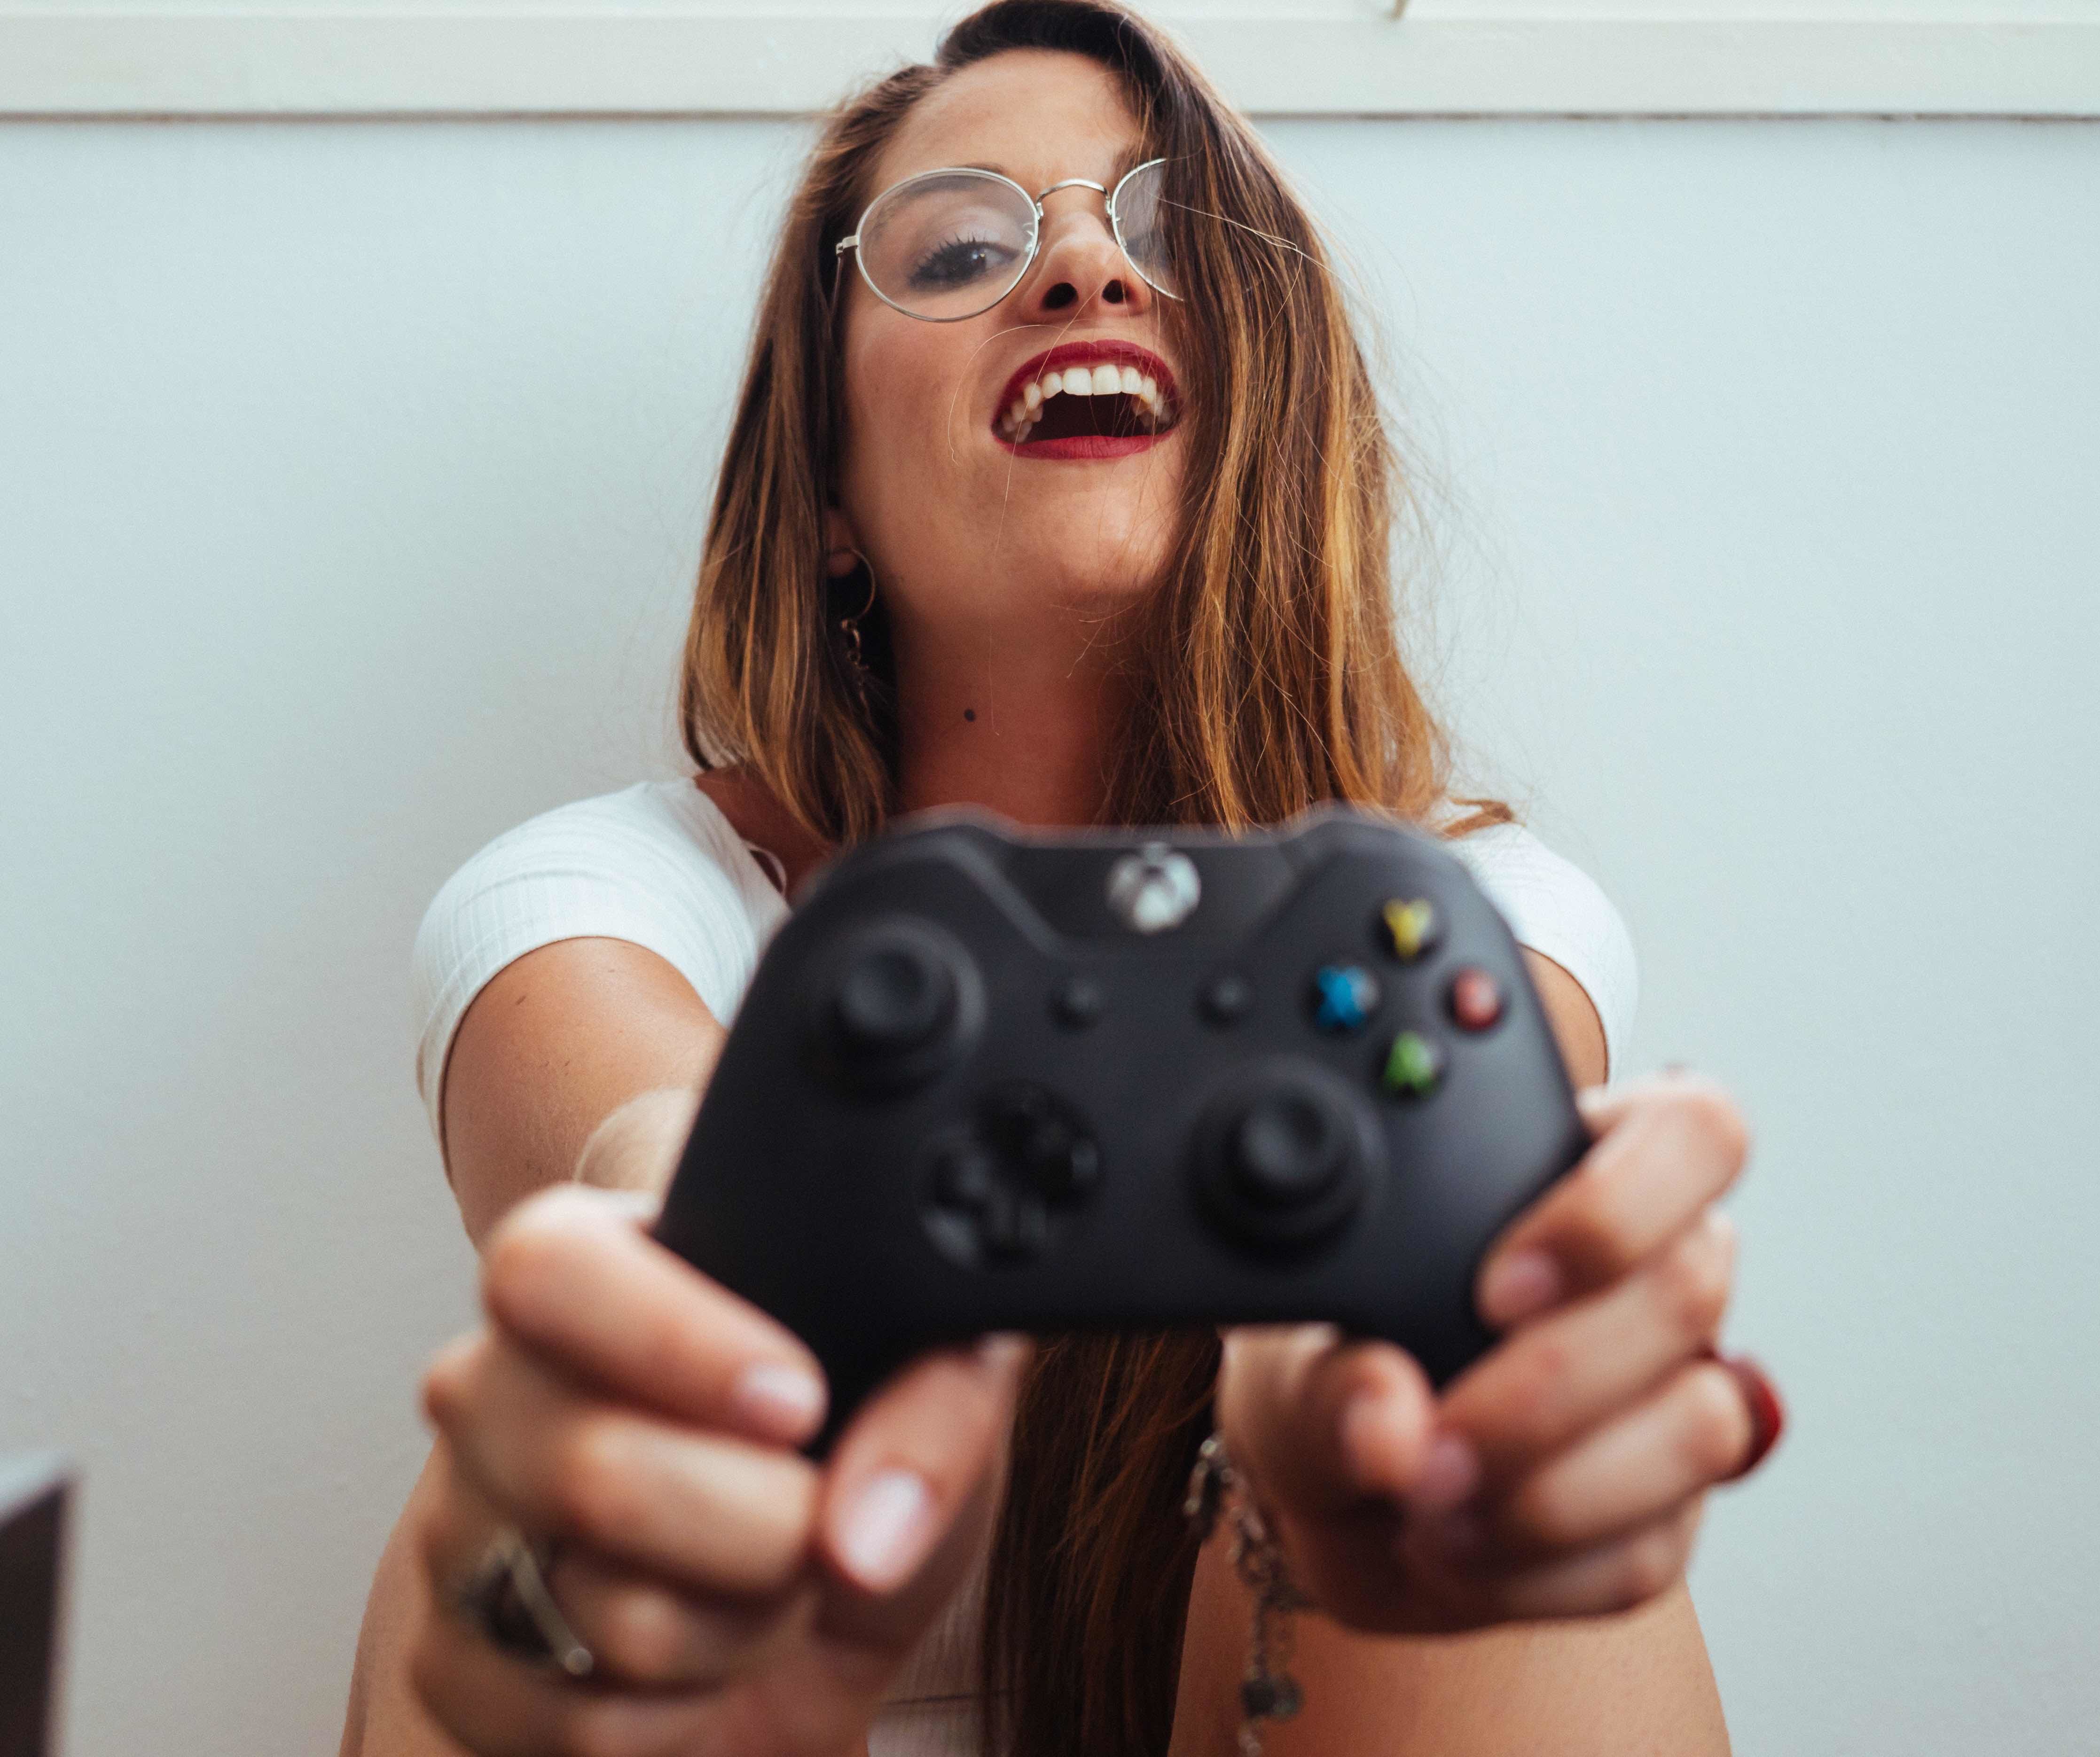 girl with xbox